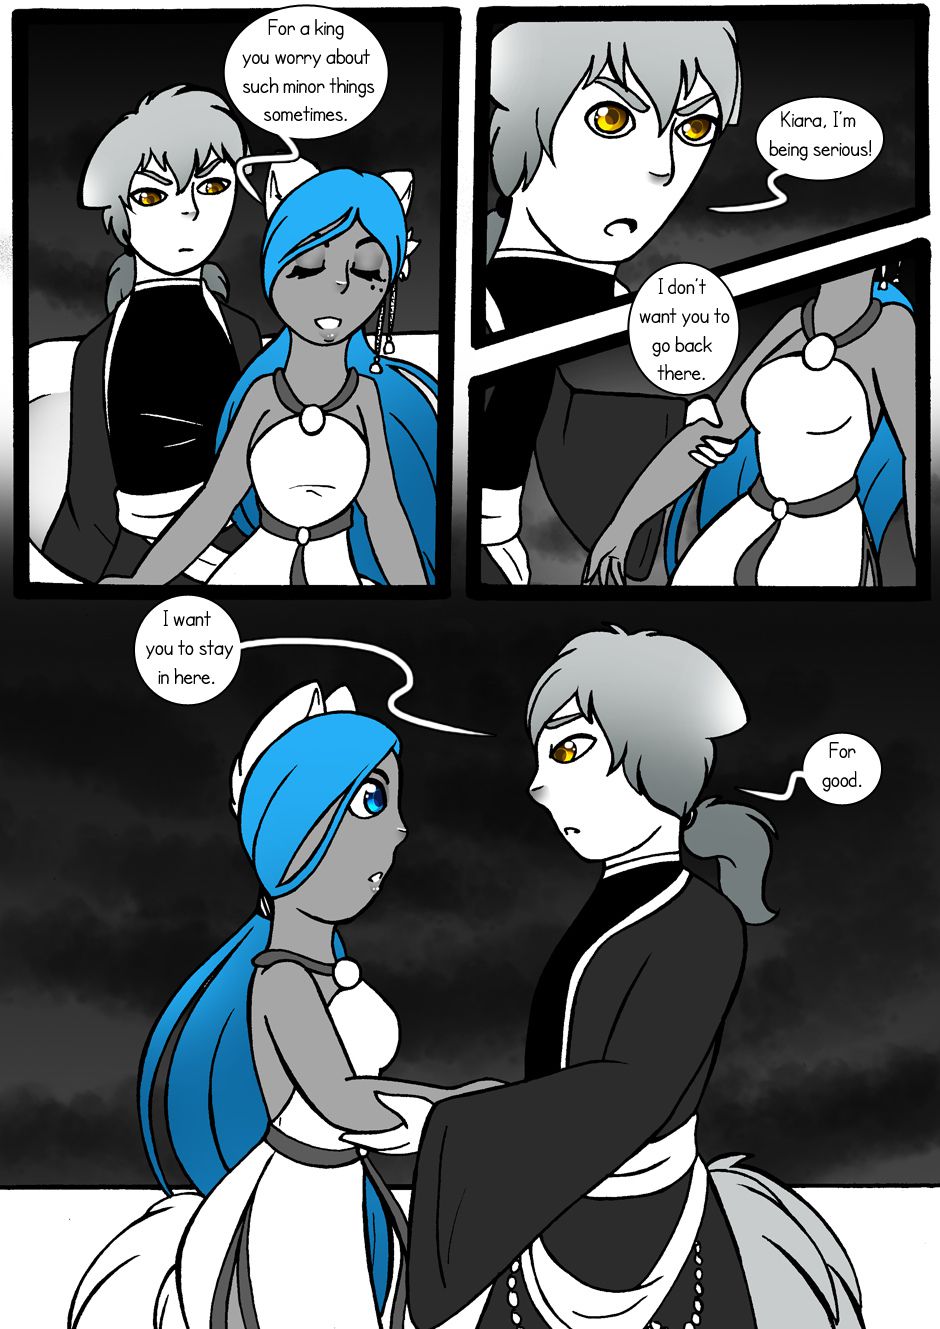 [Jeny-jen94] Between Kings and Queens [Ongoing] 119